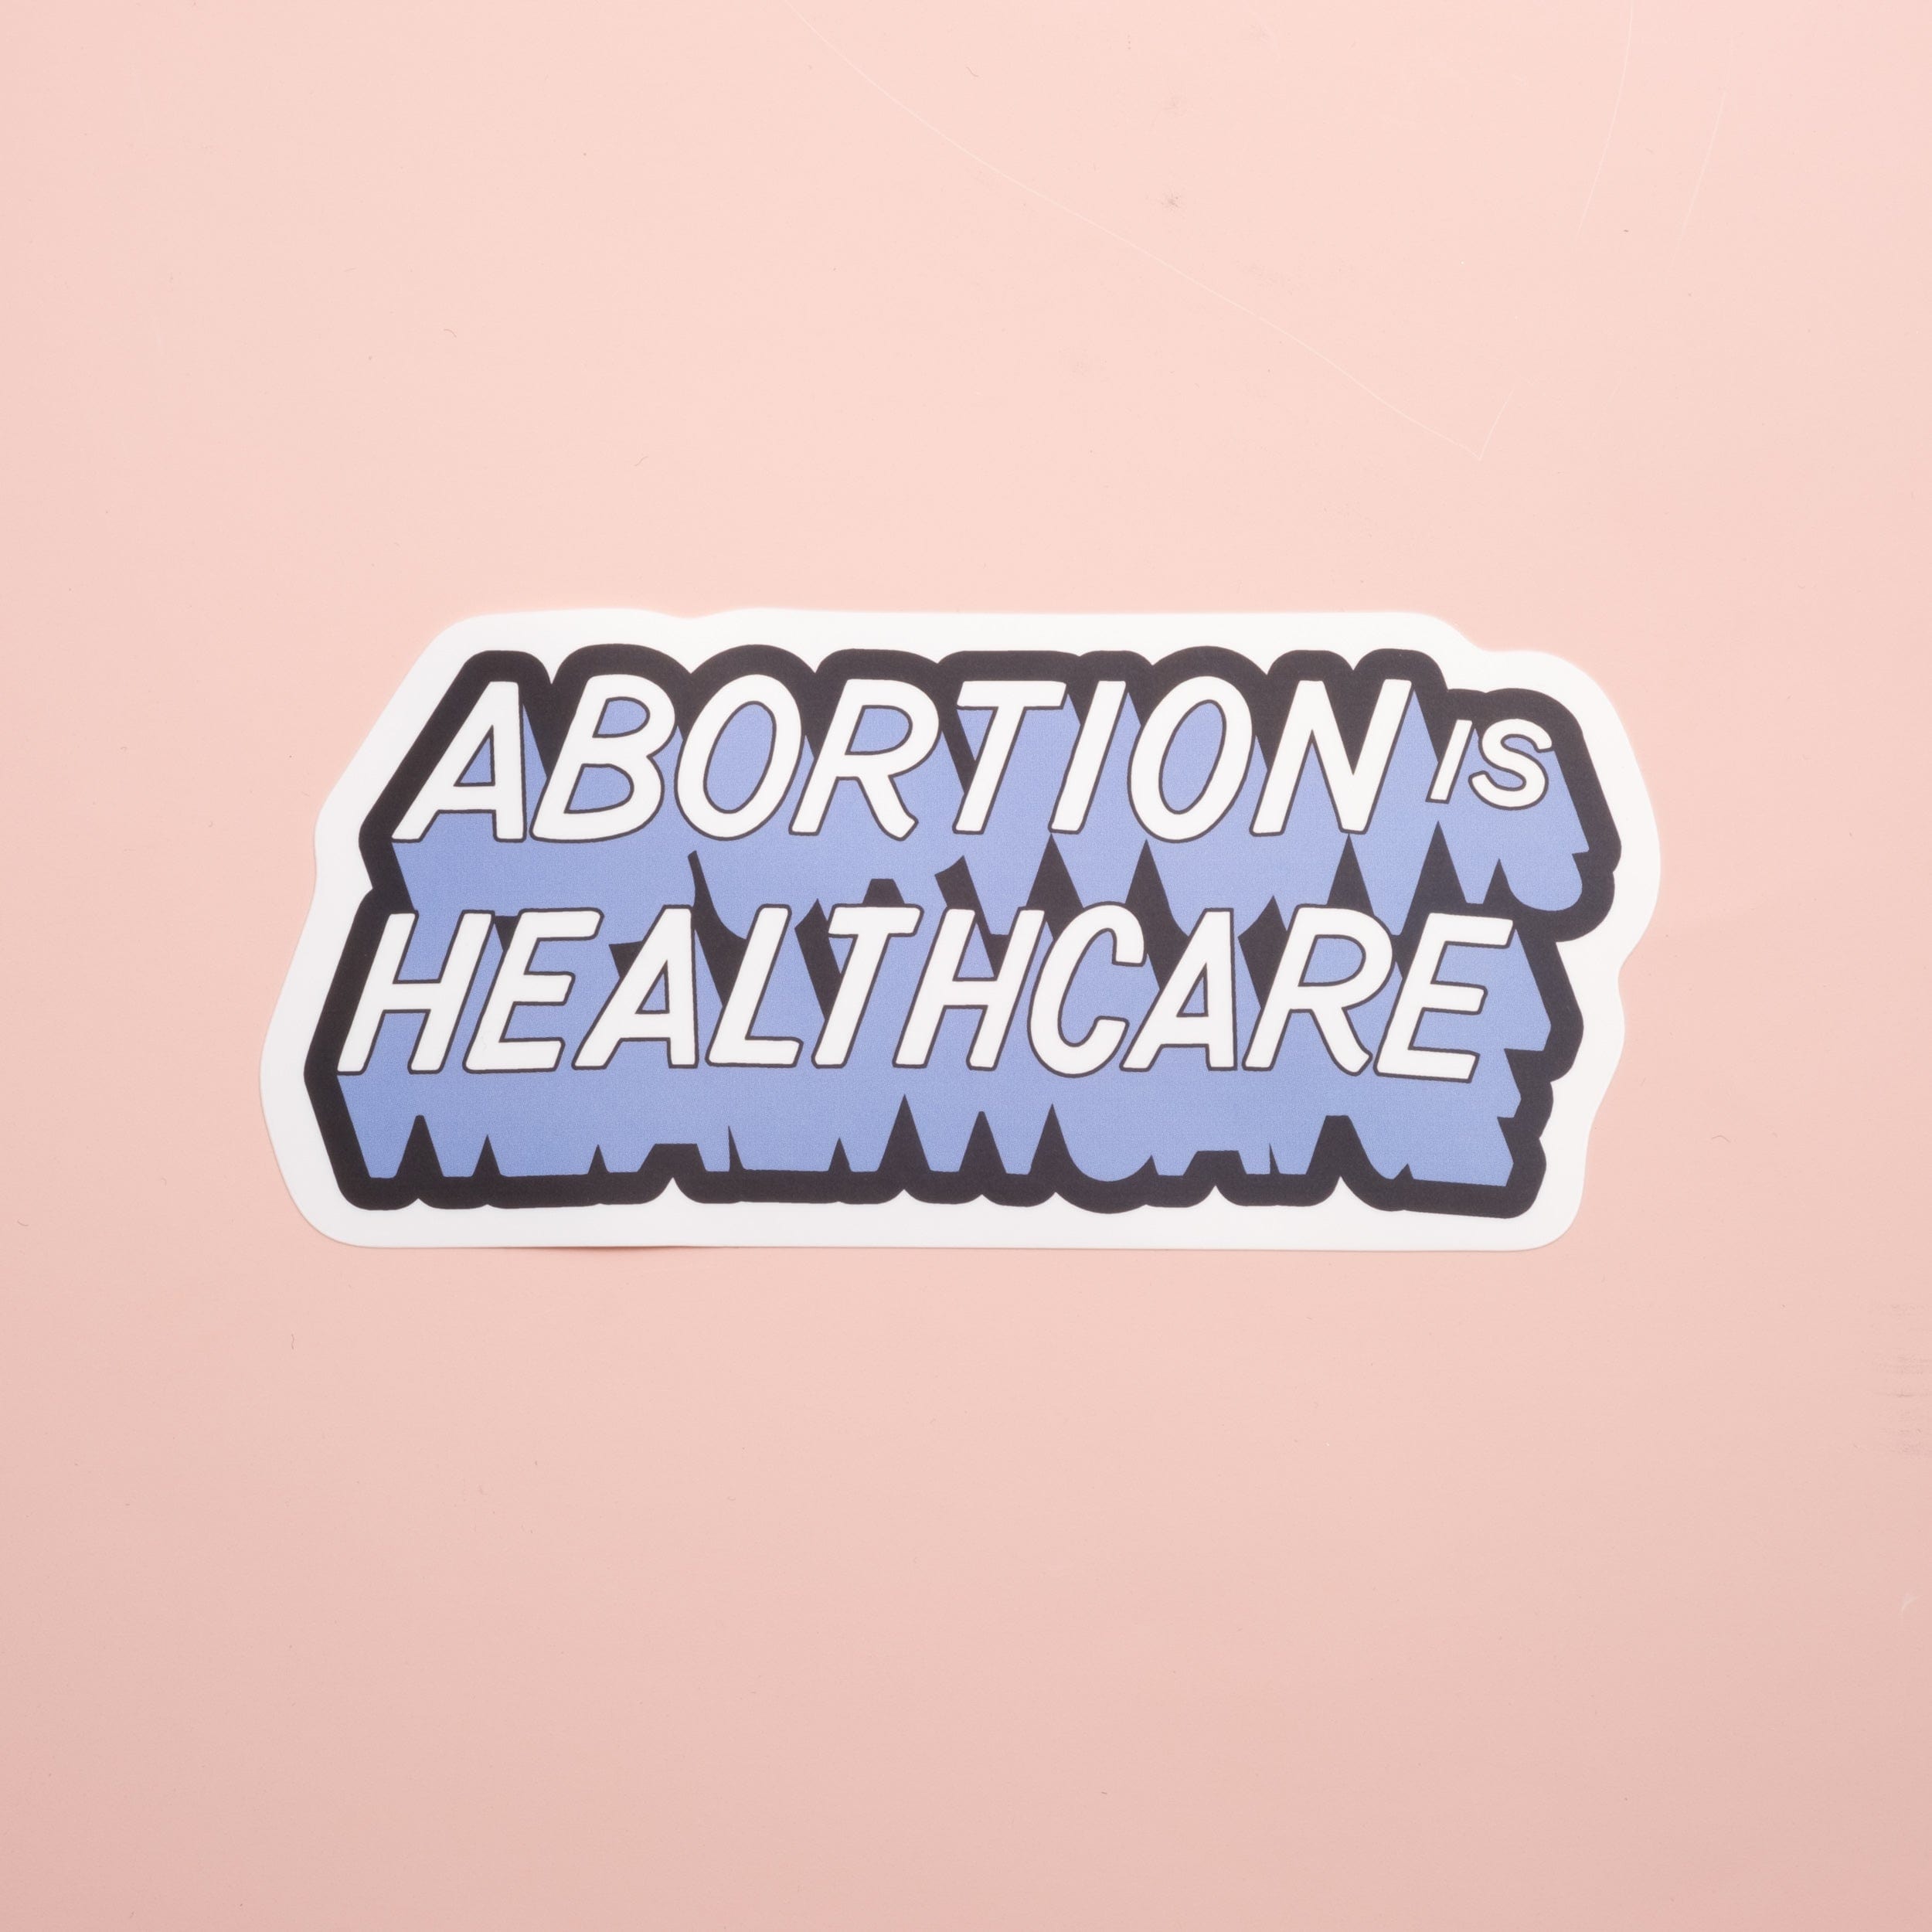 Abortion is Healthcare - Sticker